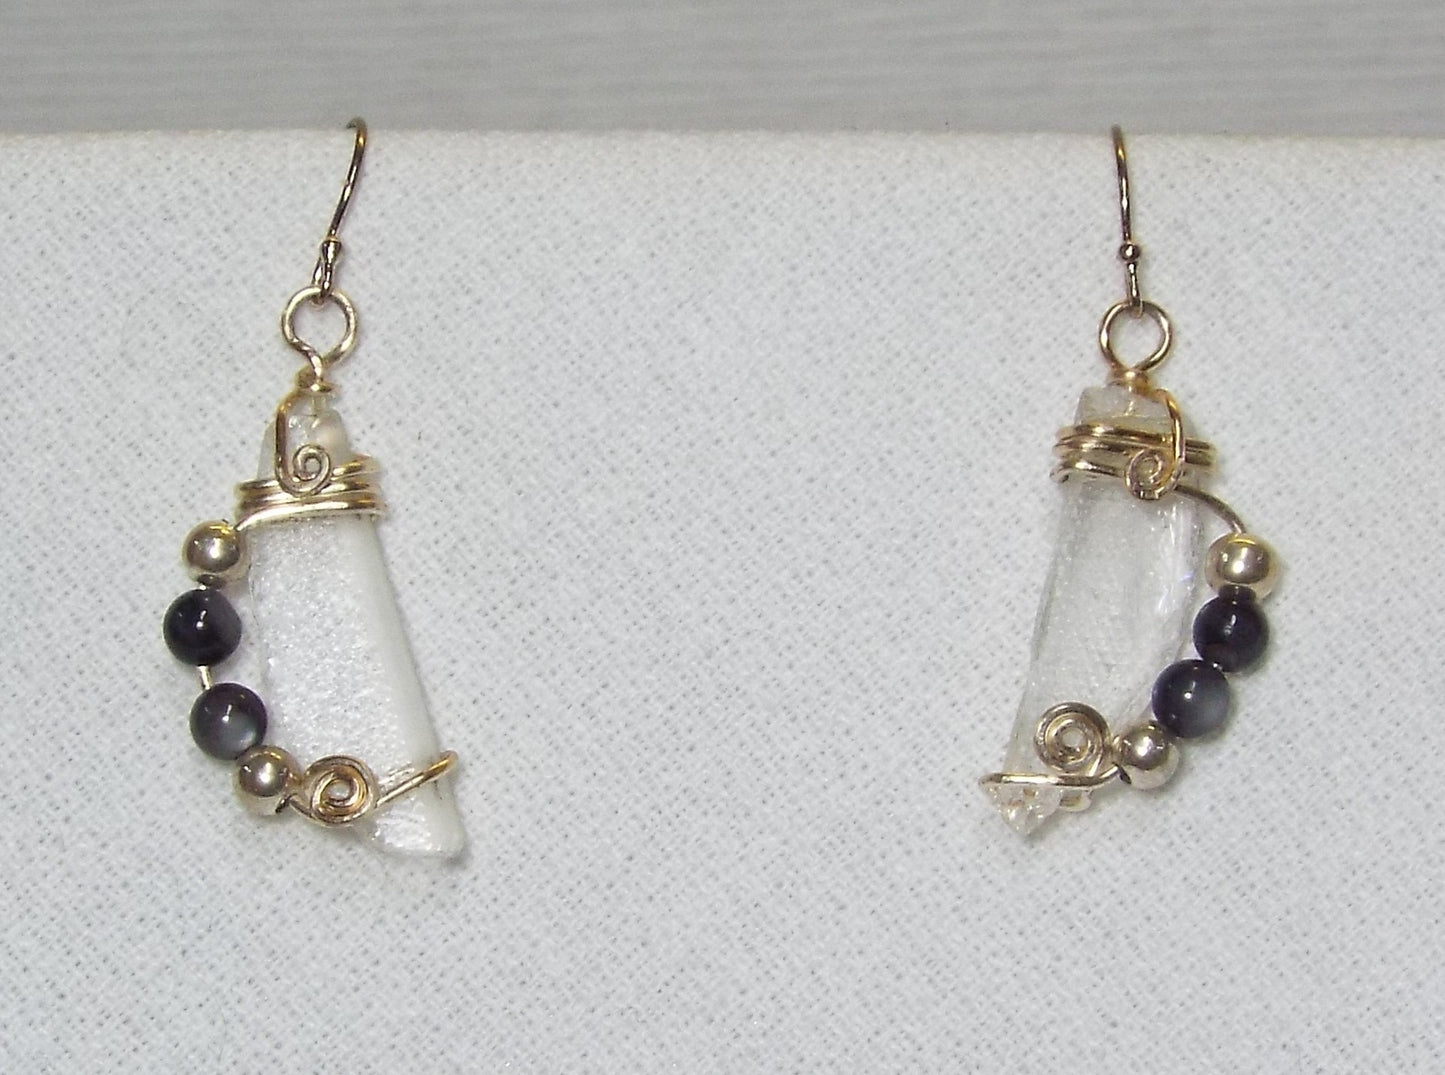 Earrings - NEW LOWER PRICES!